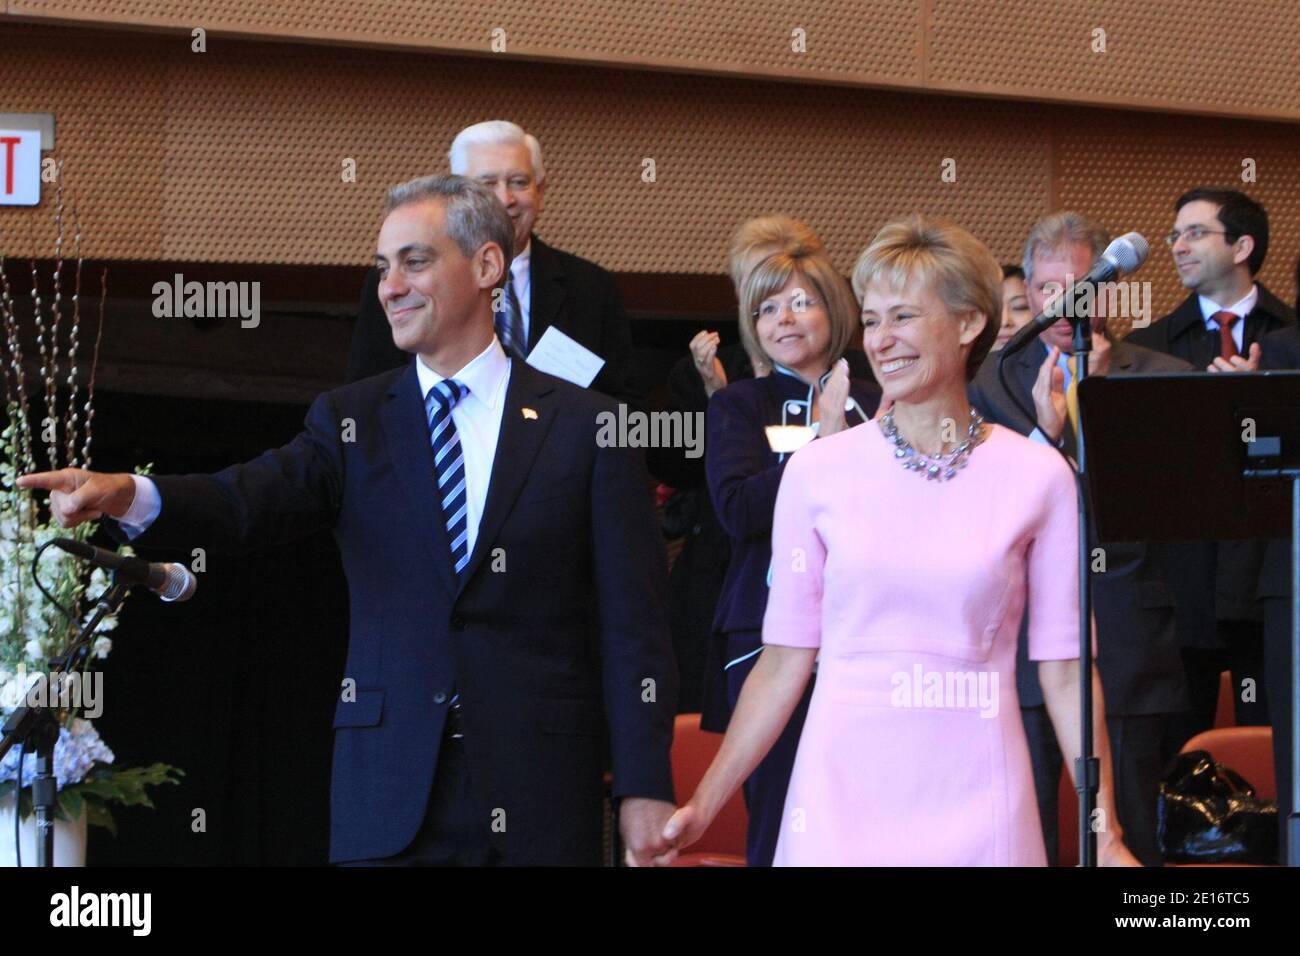 Mayor-elect Rahm Emanuel and his wife Amy Rule Emanuel, walk onto the stage for a swearing-in ceremony at Millenium Park in Chicago, Illinois on May 16, 2011. Photo by Alexandra Buxbaum/ABACAPRESS.COM Stock Photo